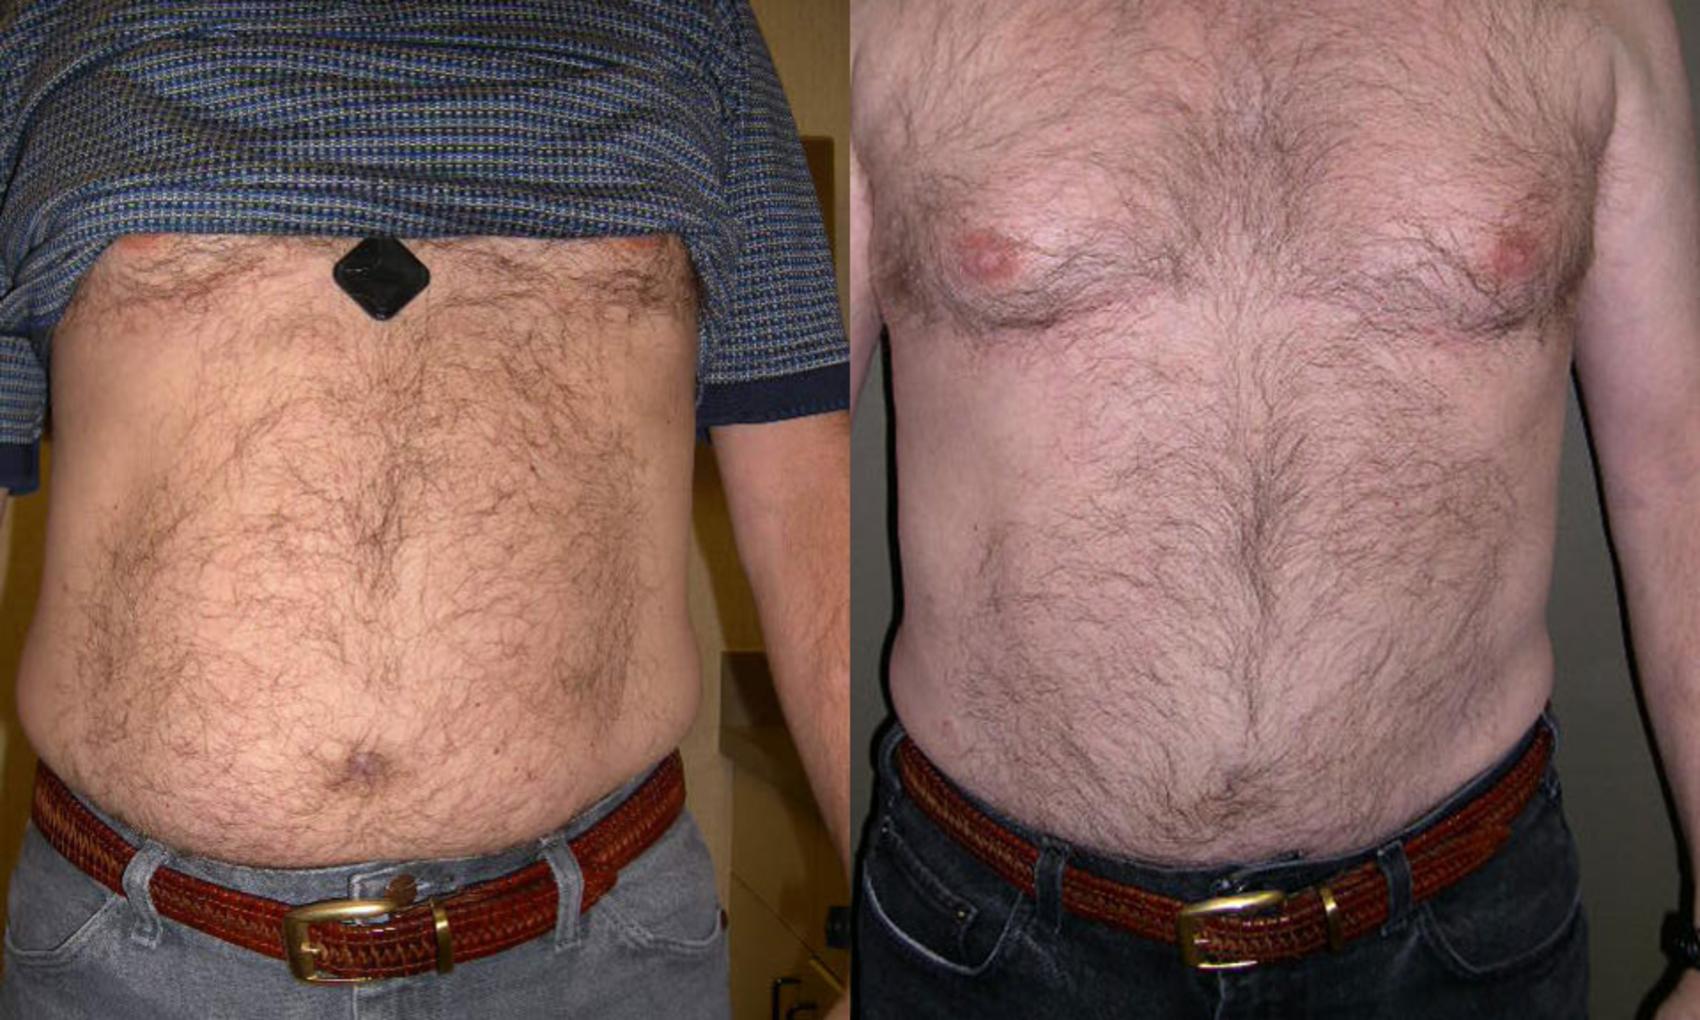 Liposuction Before & After Photo | Atlanta, GA | Plastic Surgery Center of the South